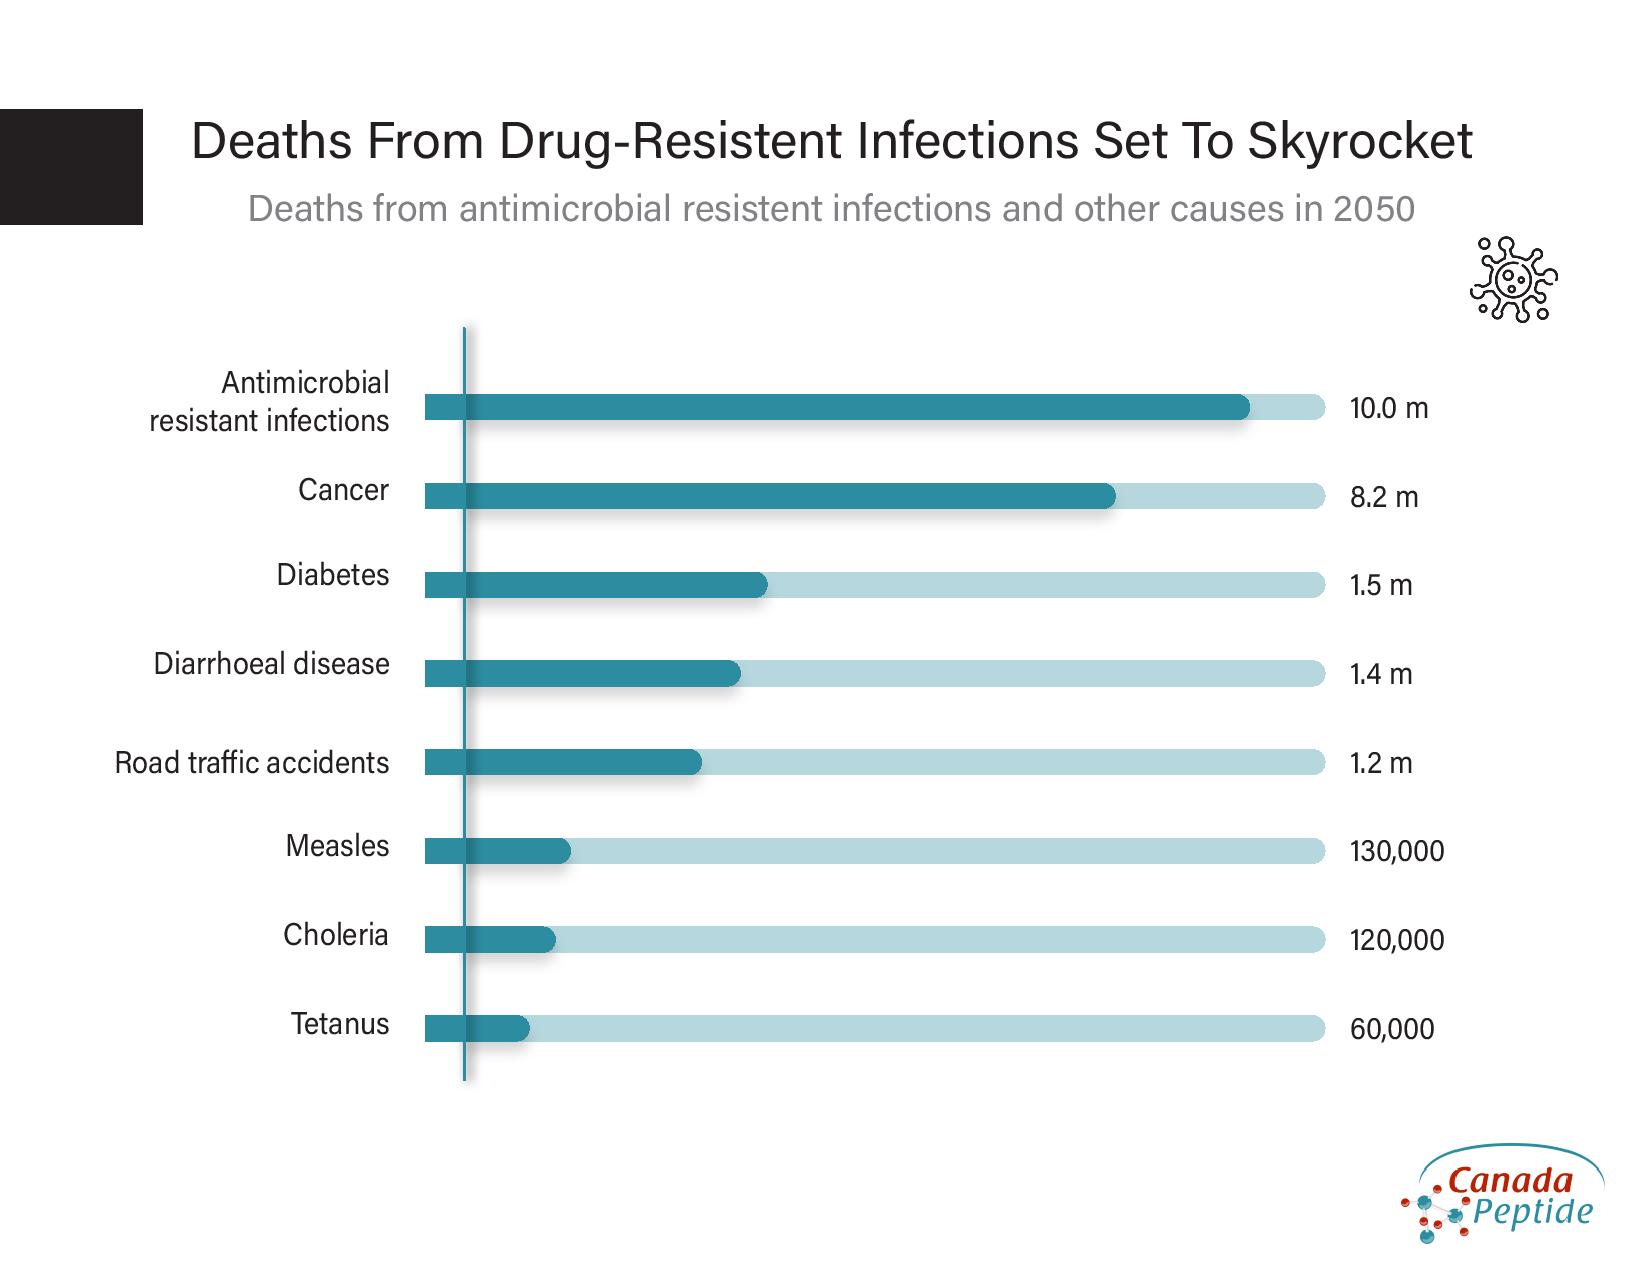 https://www.canadapeptide.com/wordpress/wp-content/uploads/2020/12/deaths-from-drug-resistent-infections.pdf